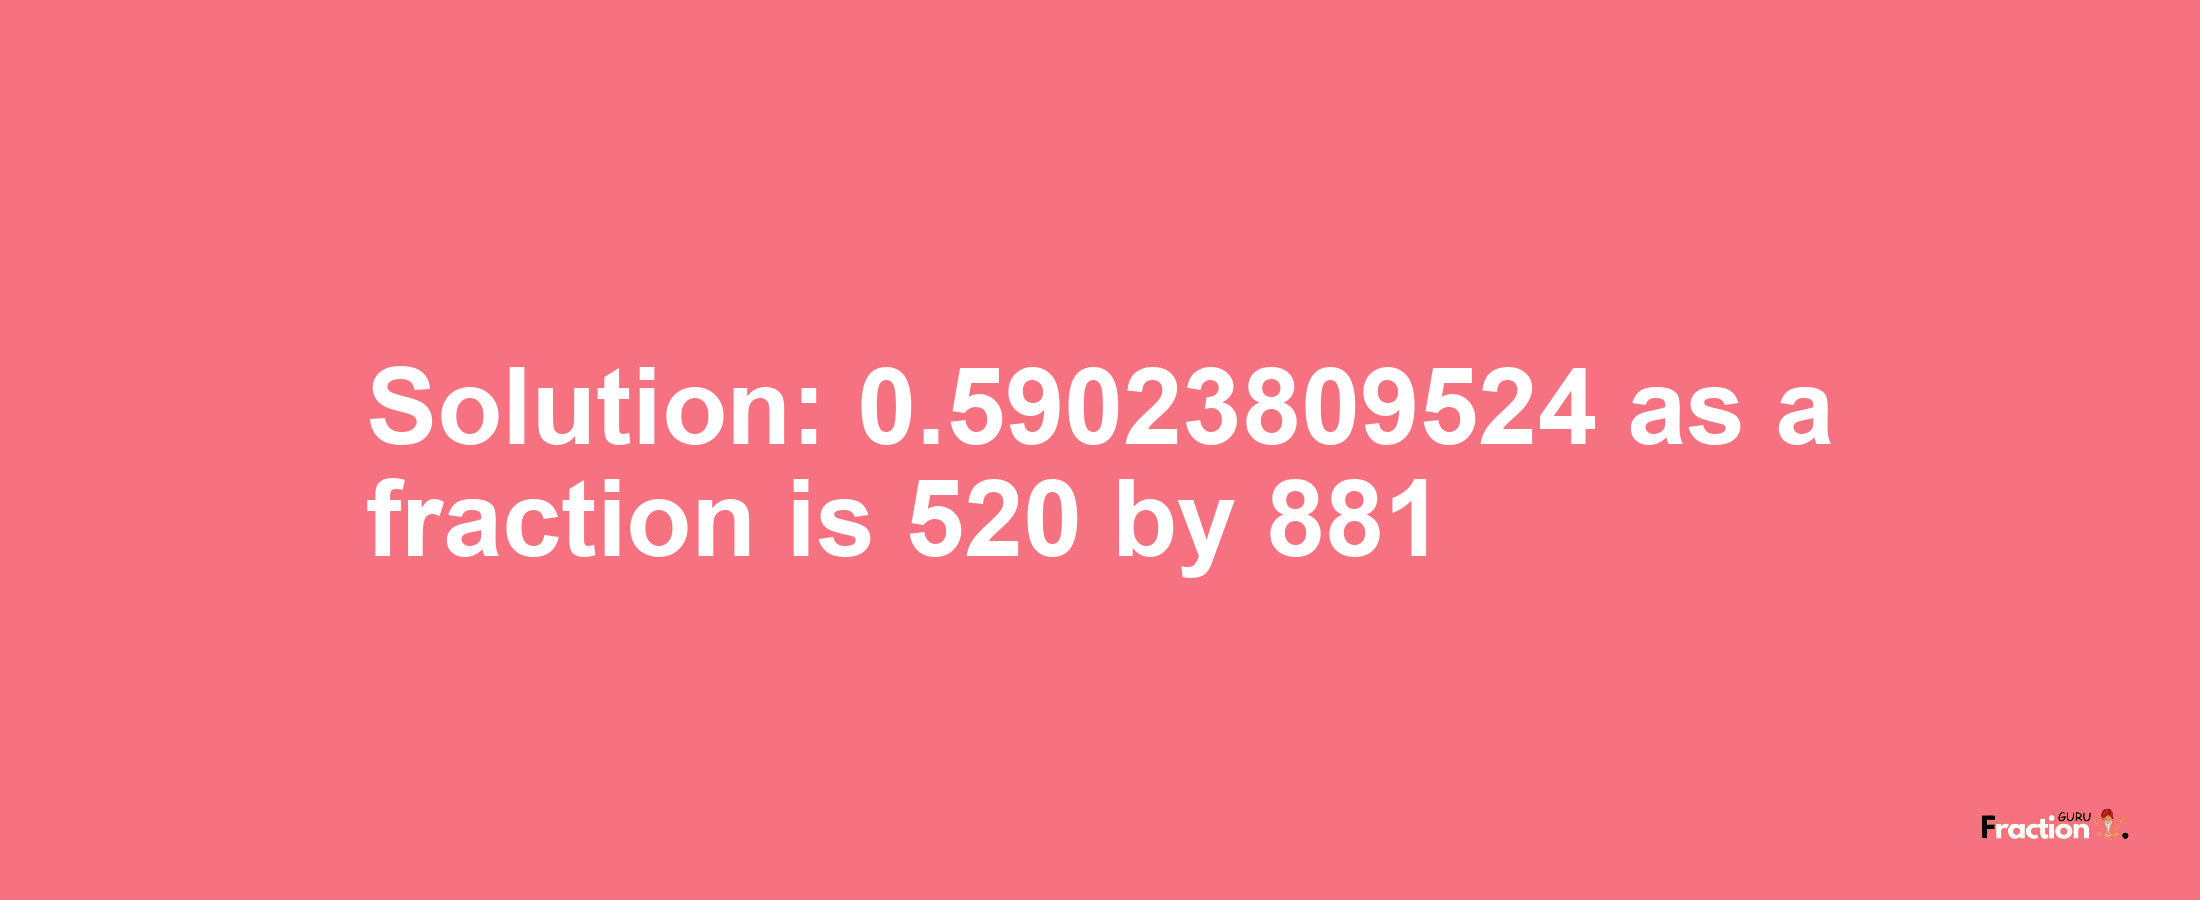 Solution:0.59023809524 as a fraction is 520/881